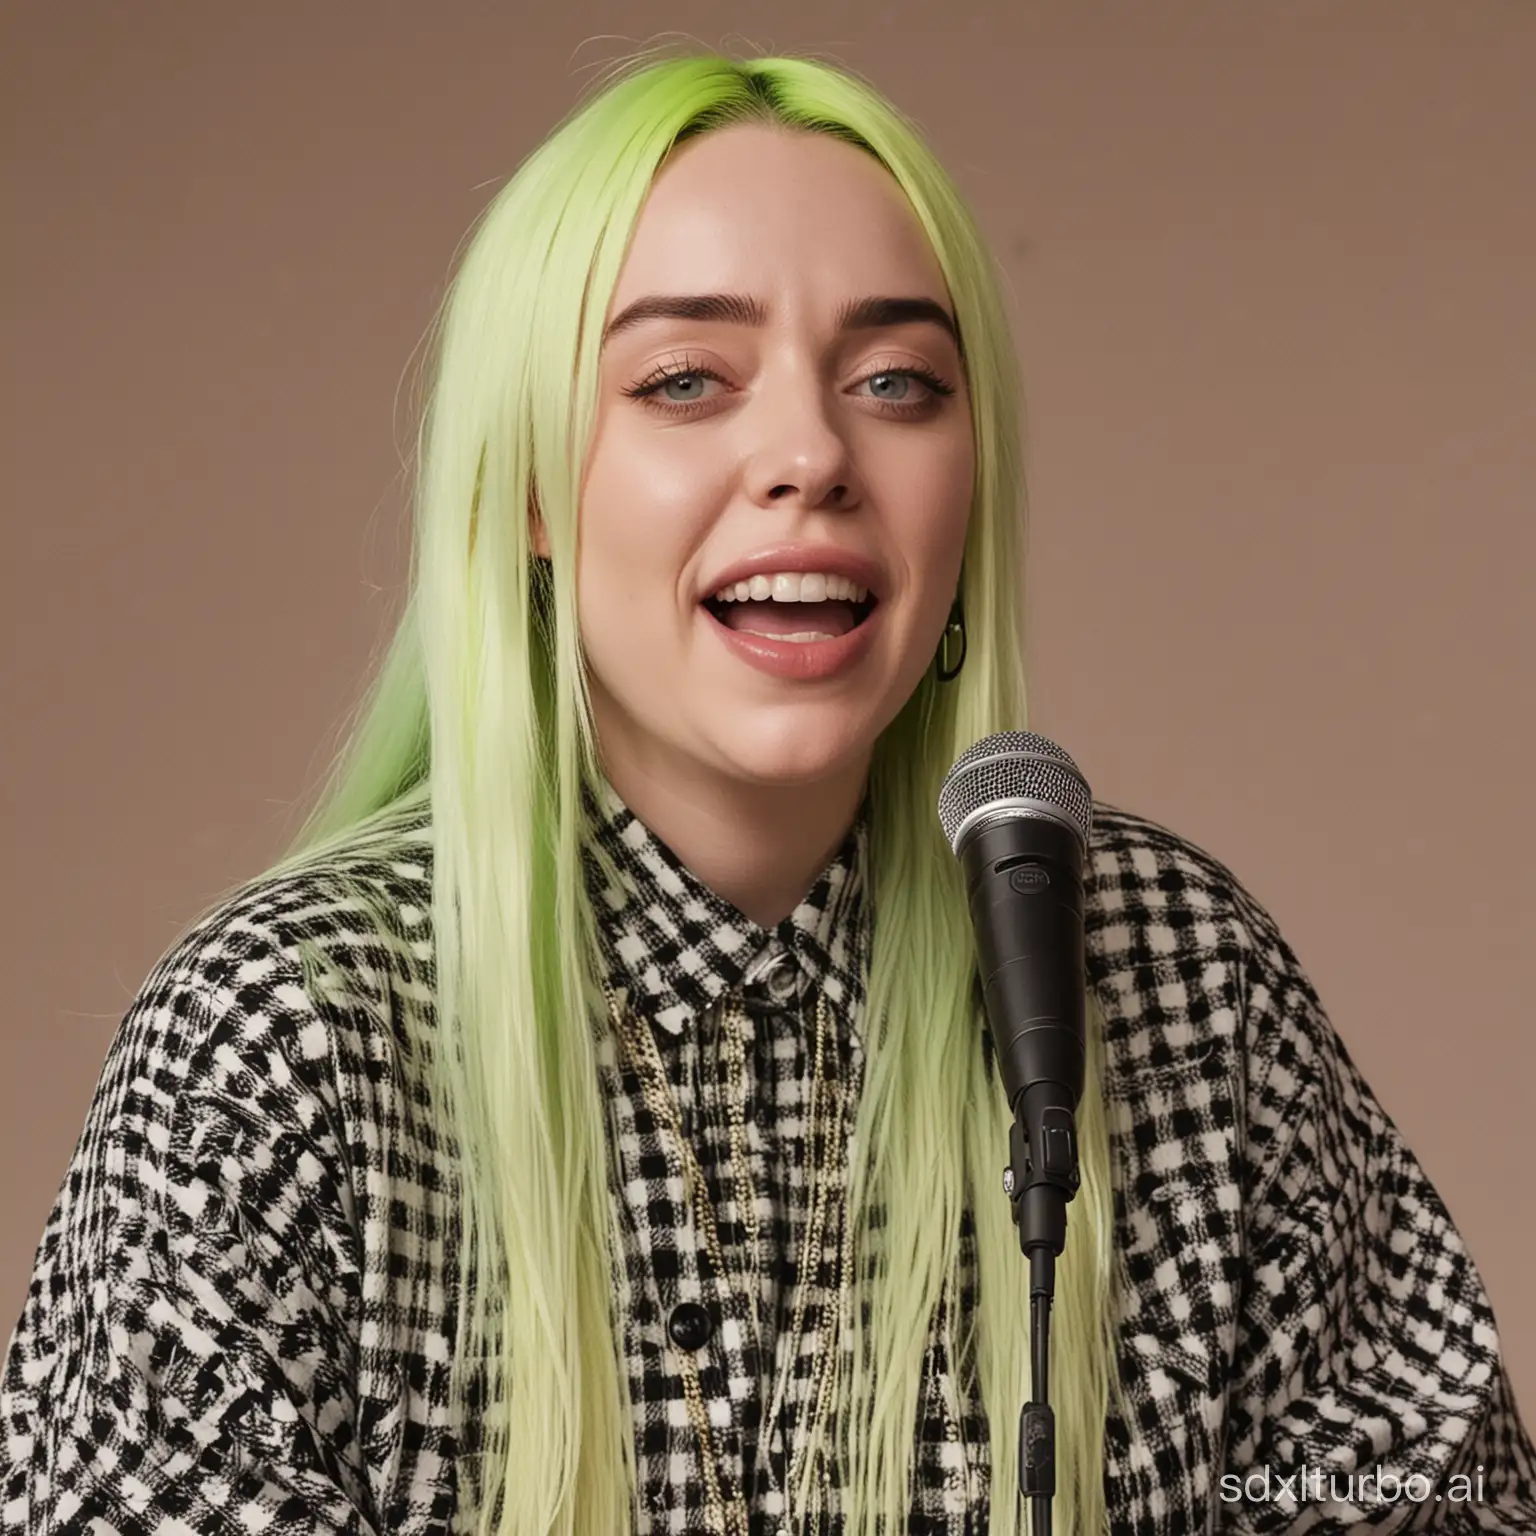 Billie-Eilish-Performing-Live-Concert-with-Signature-Style